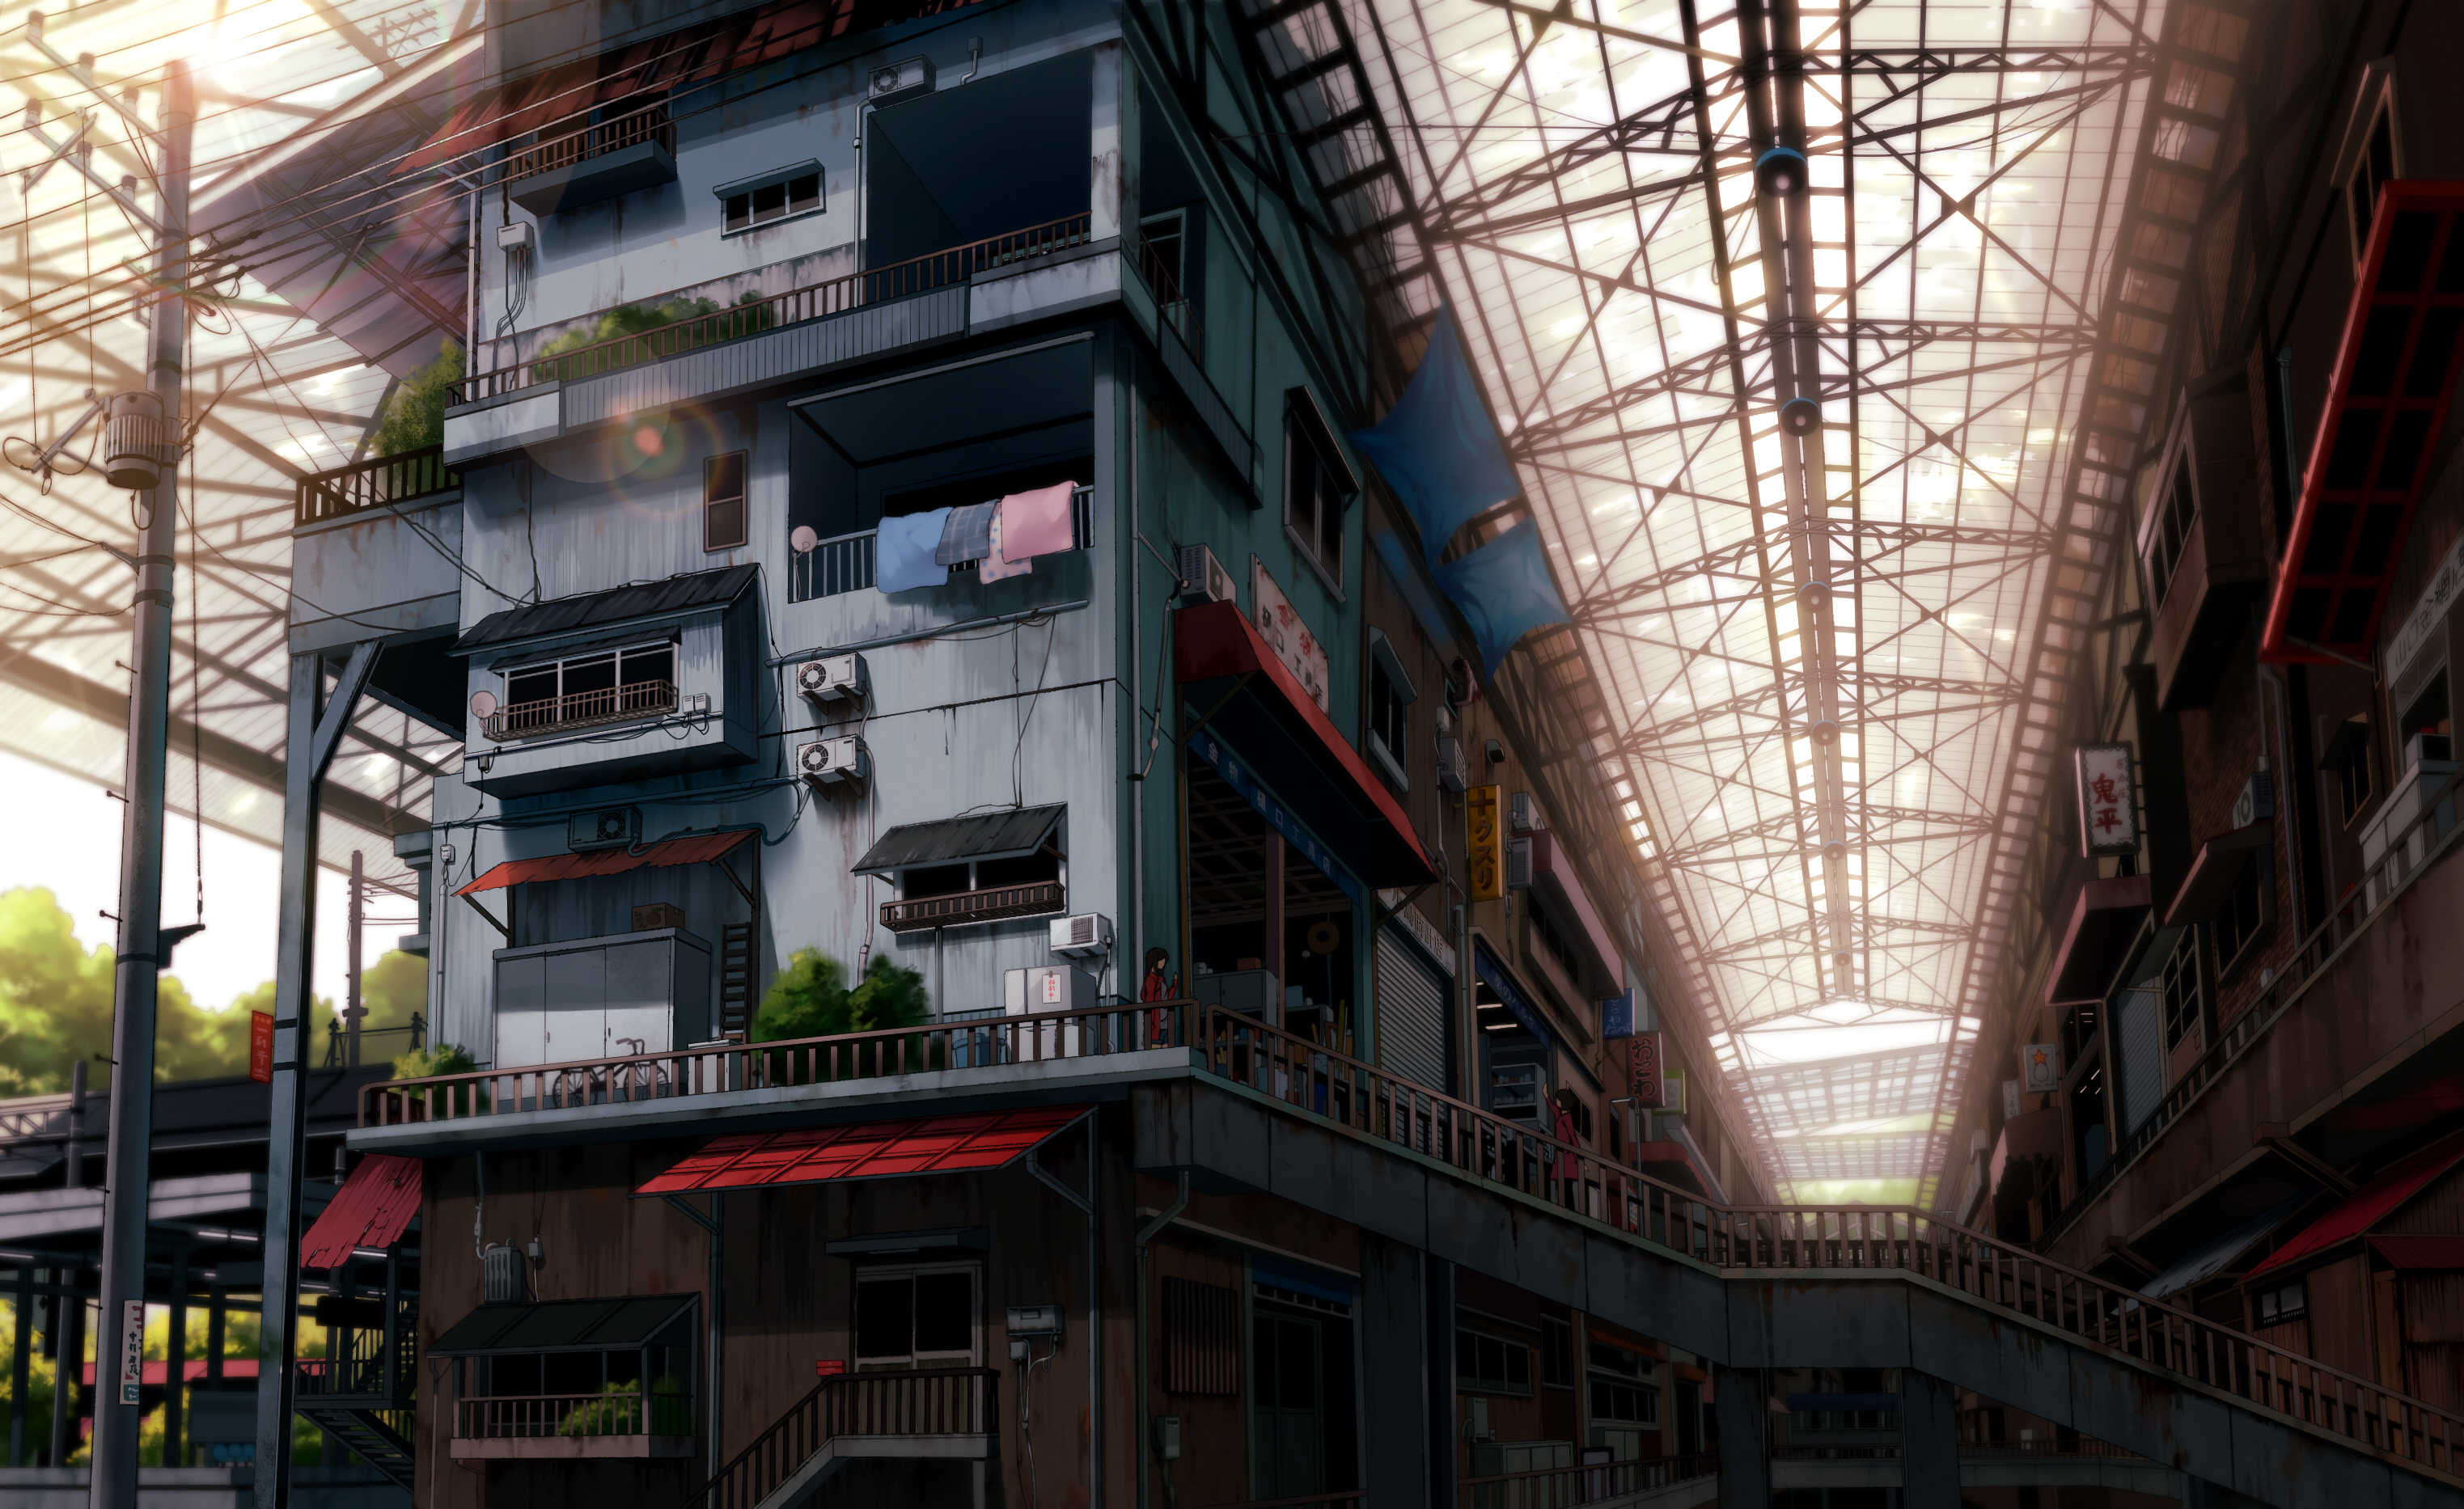 Free download wallpaper Anime, Building on your PC desktop